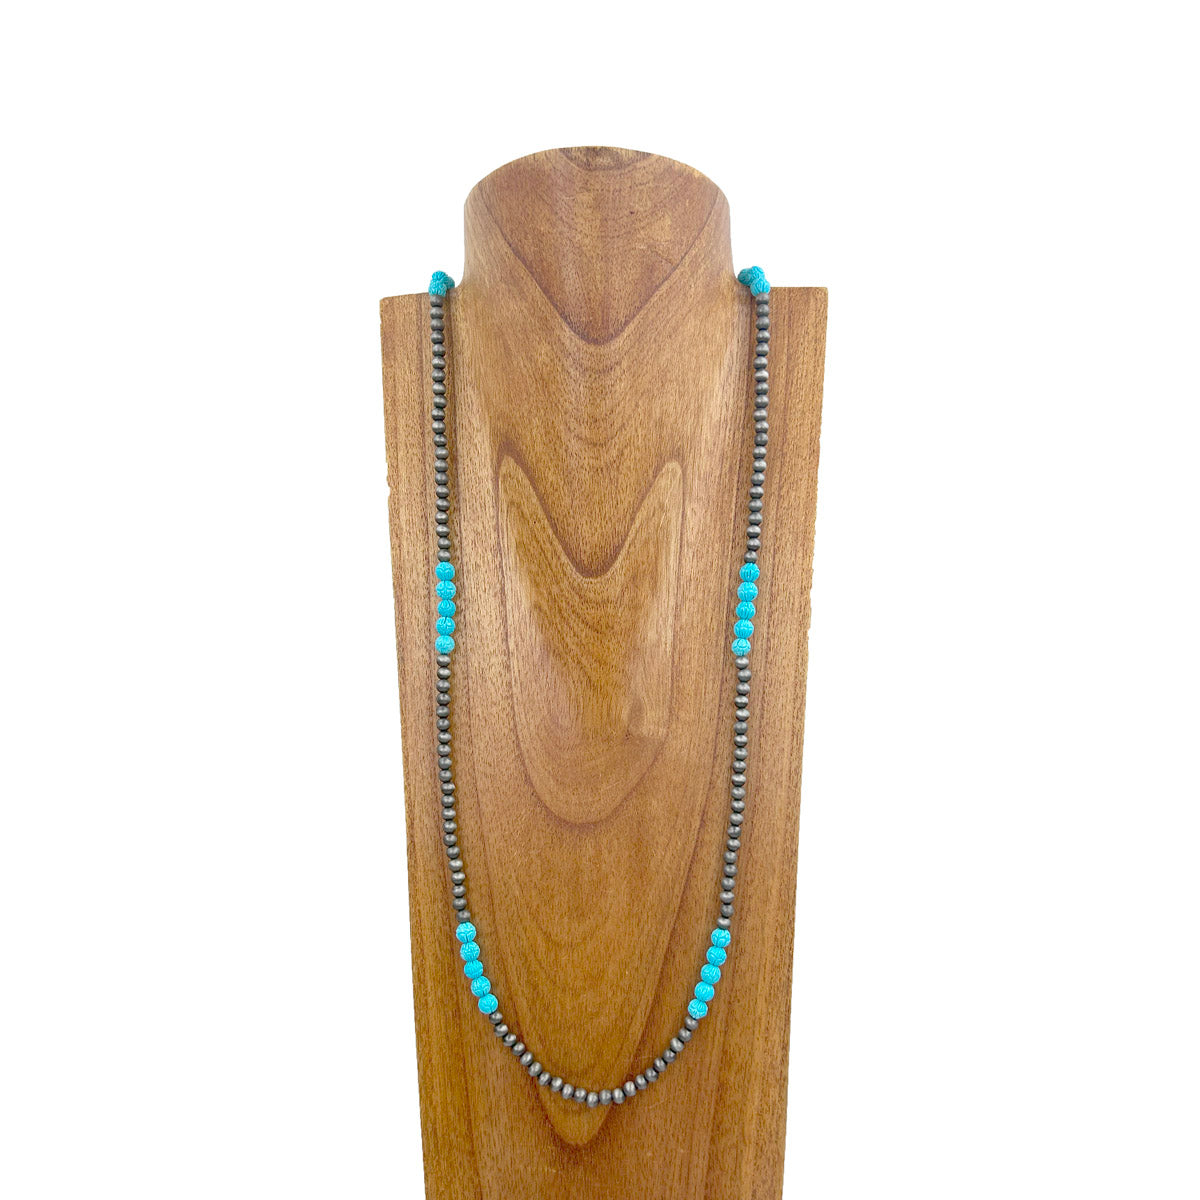 NKZ231124-01                        40 inches silver Navajo pearl with blue turquoise stone beads Necklace